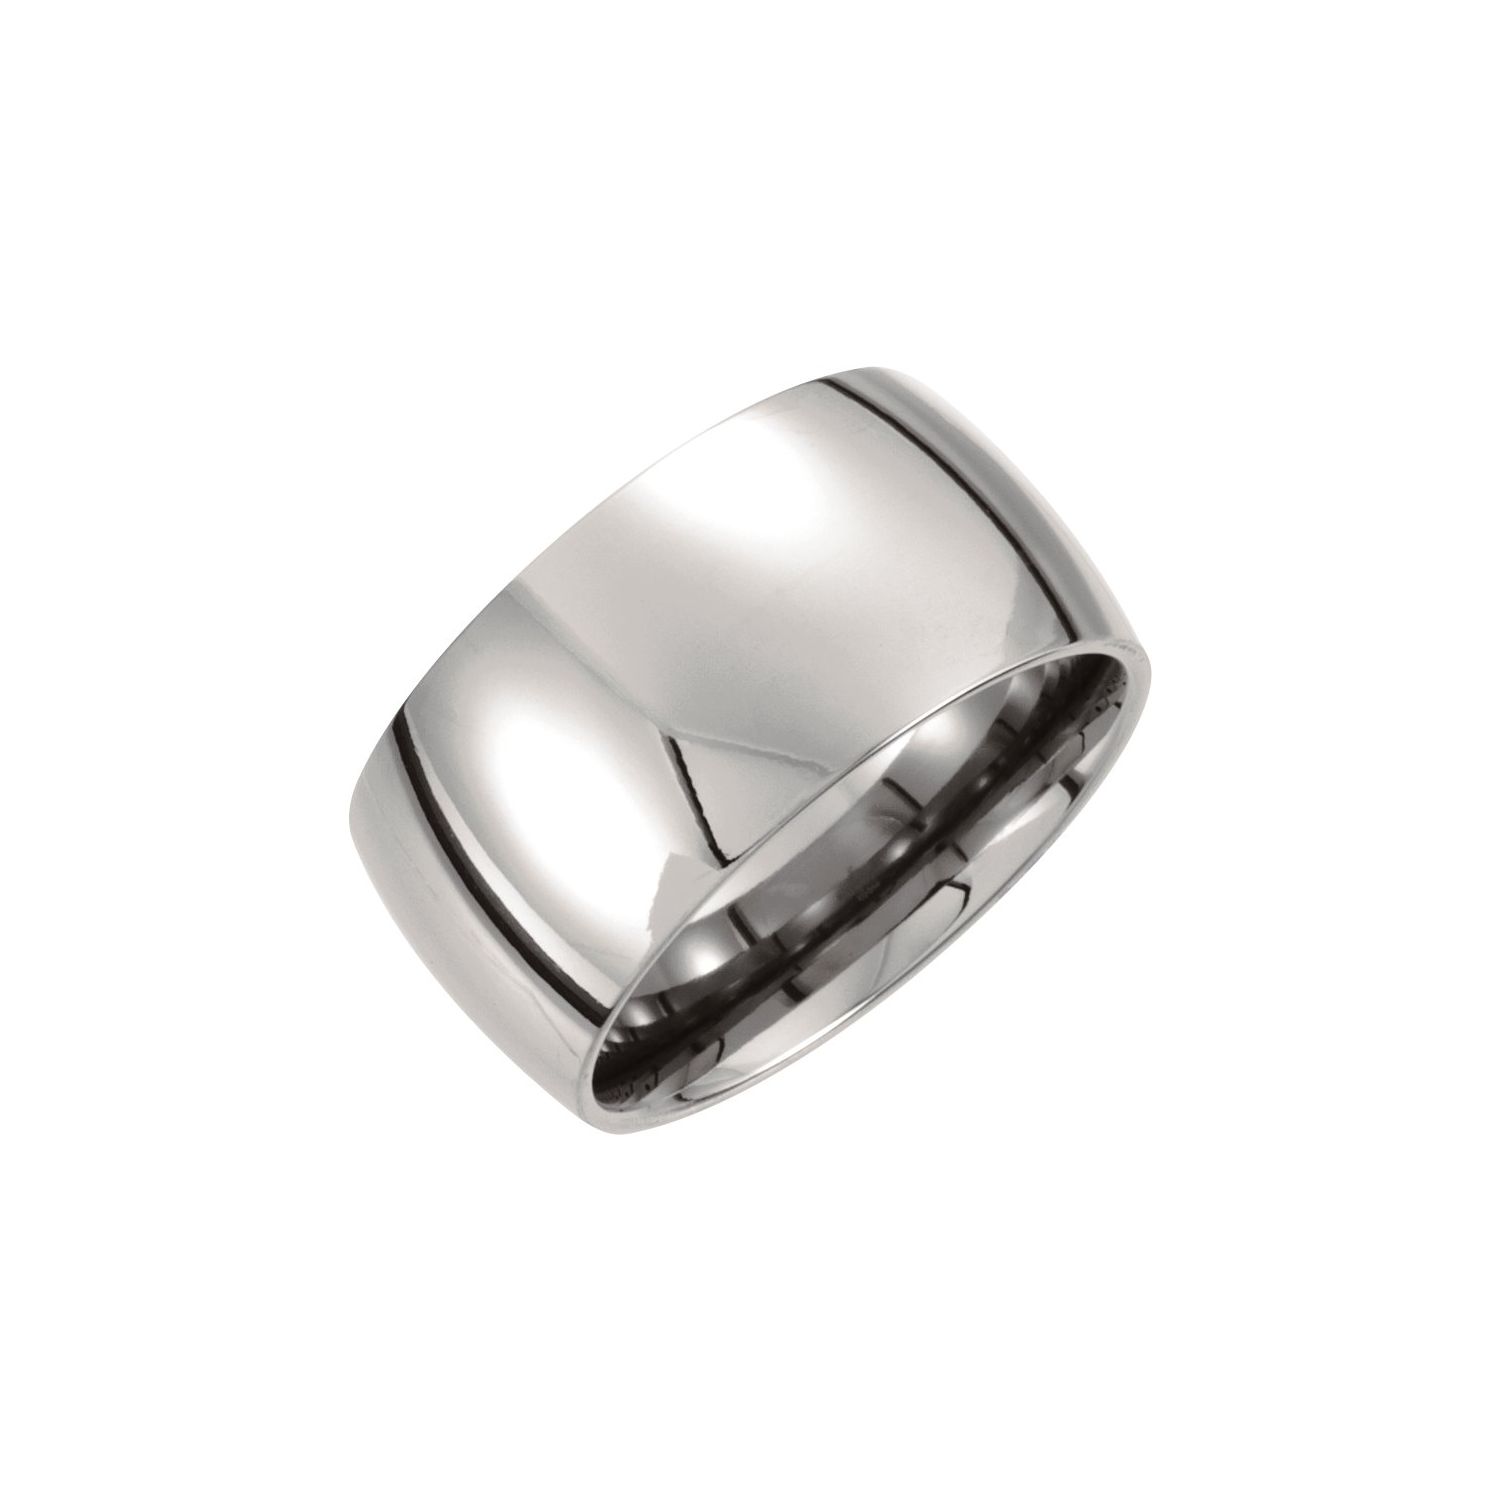 IceCrave Women's Titanium 12mm Domed Polished Band